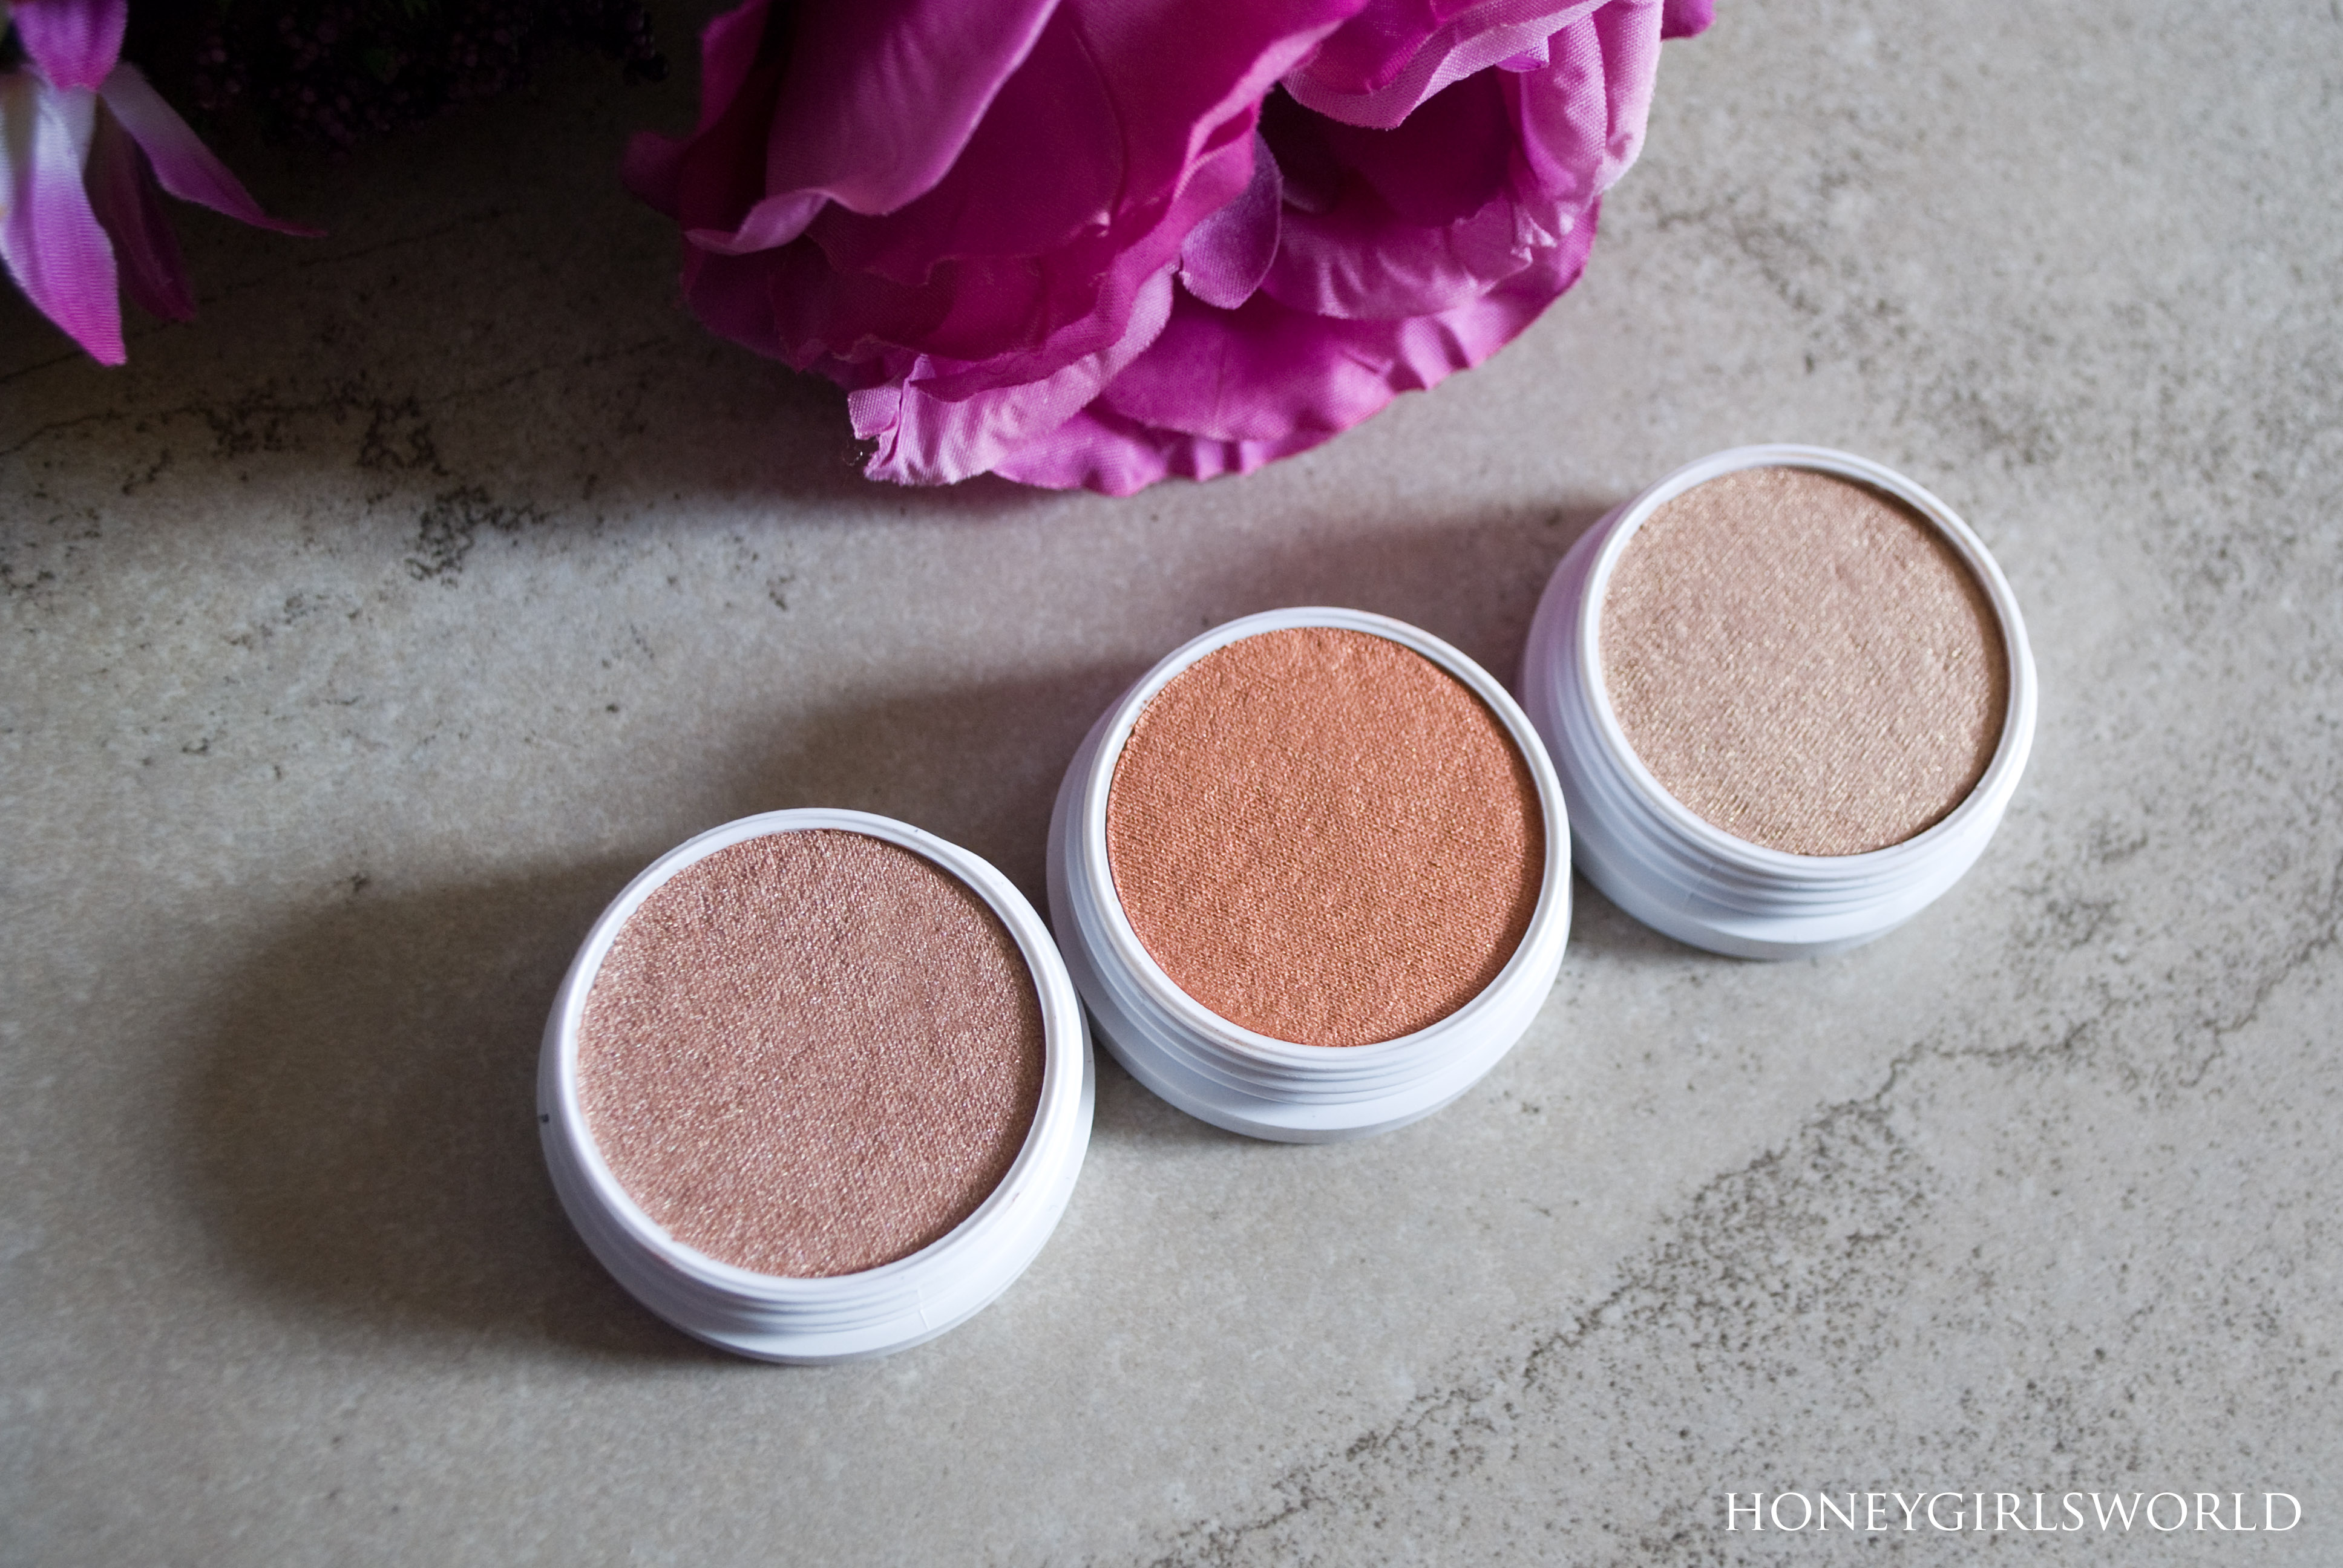 New Colour Pop Highlighters - Was it Love at First Sight For Me? http://honeygirlsworld.com